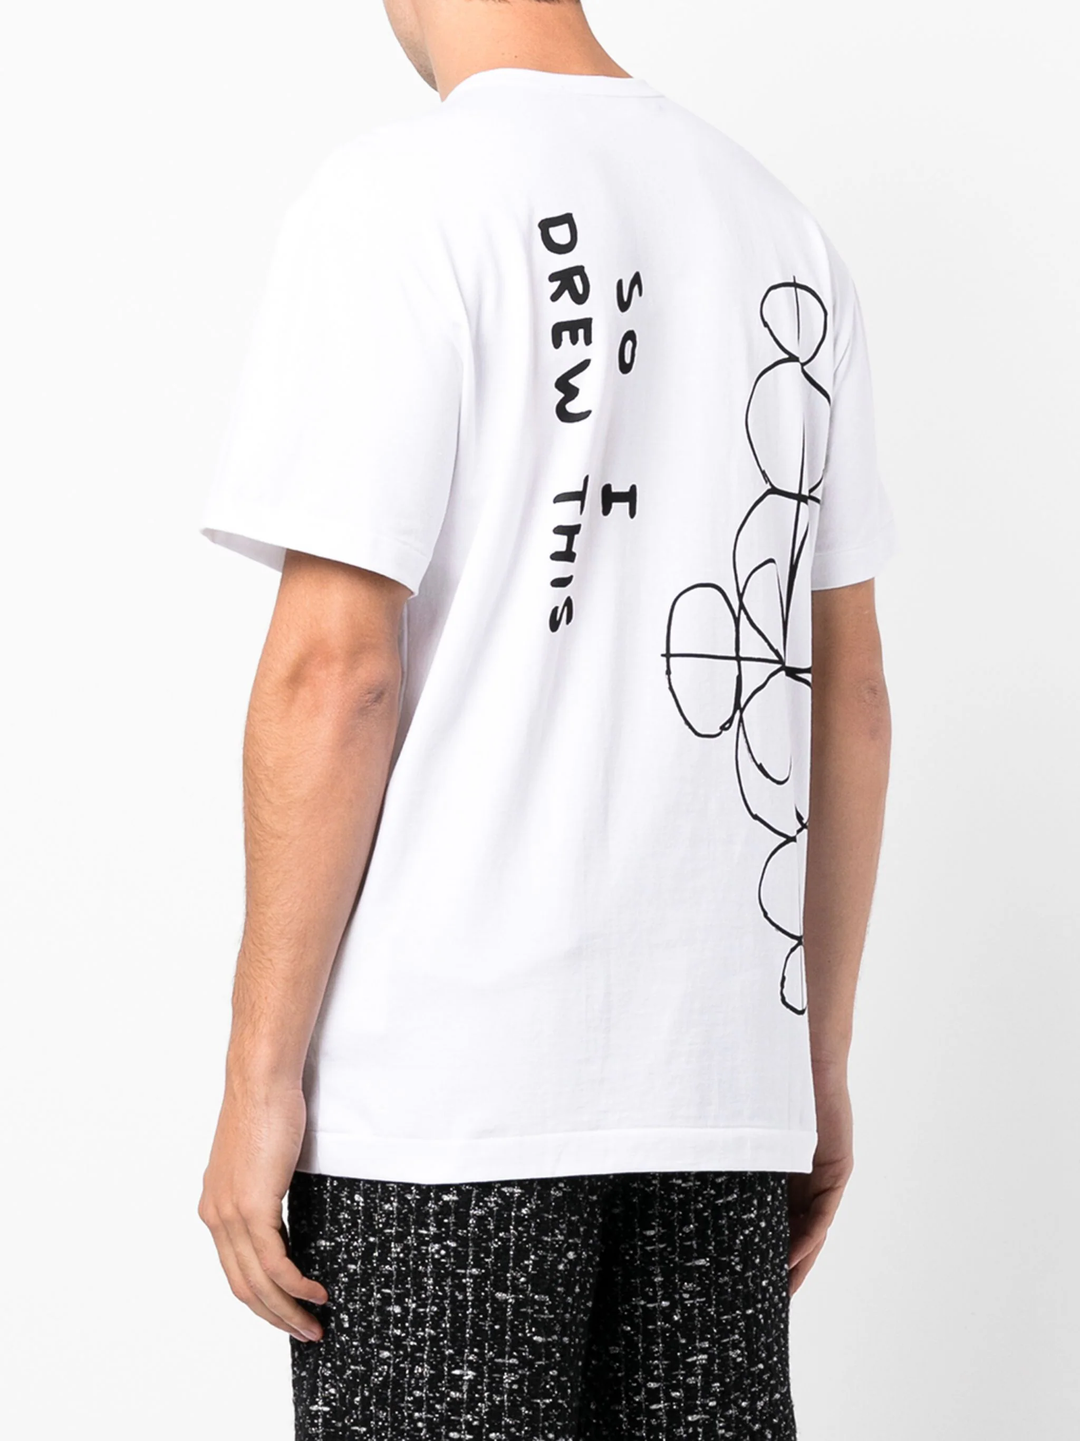 Cotton Jersey Printed Tee